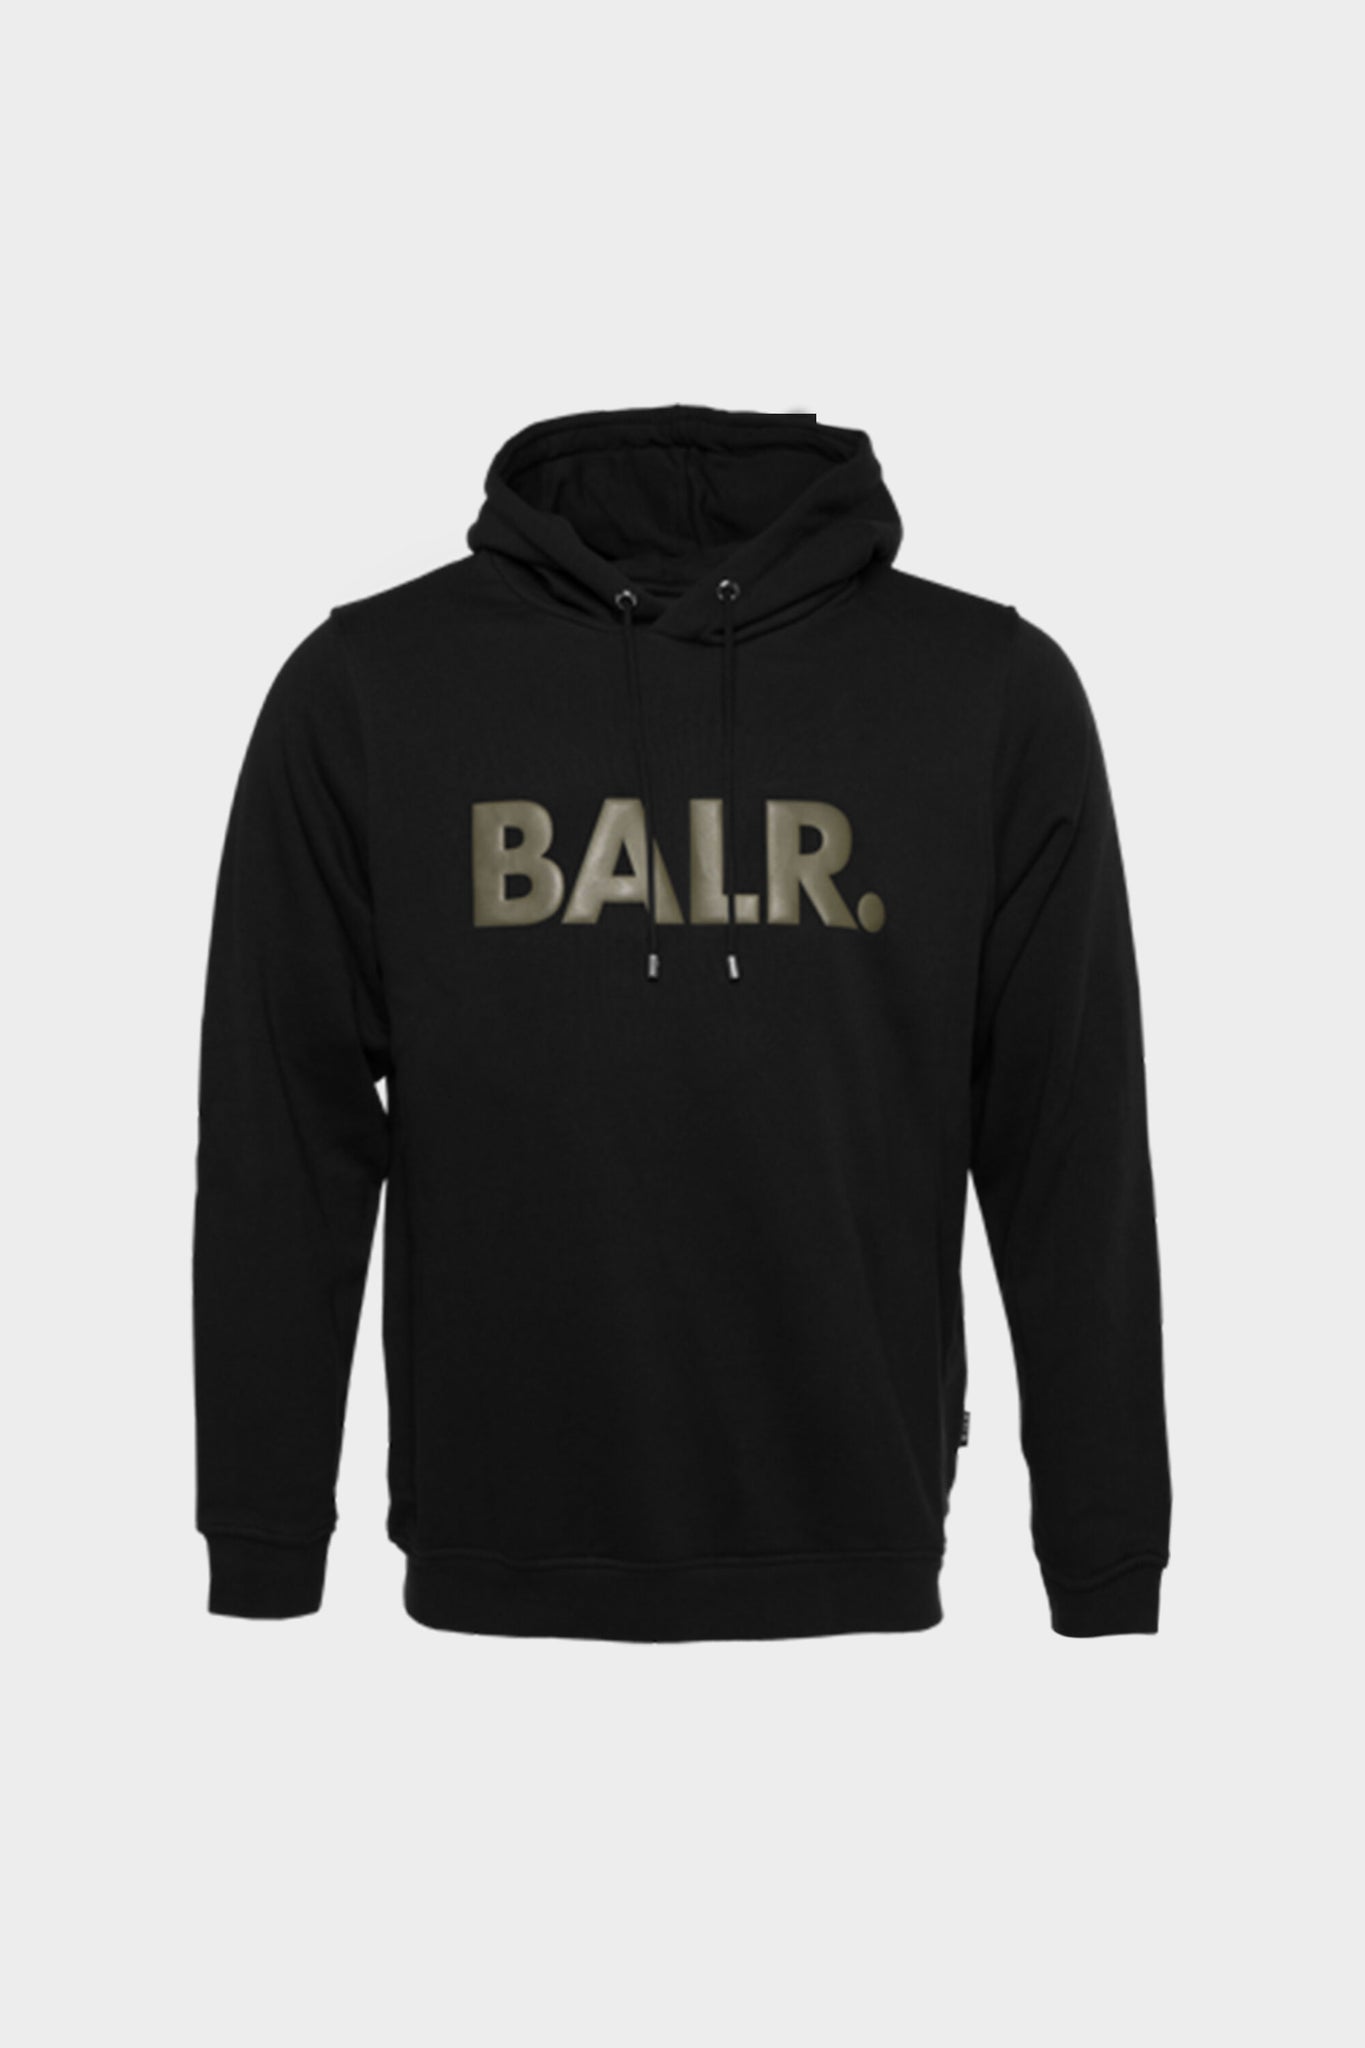 Collections – BALR.